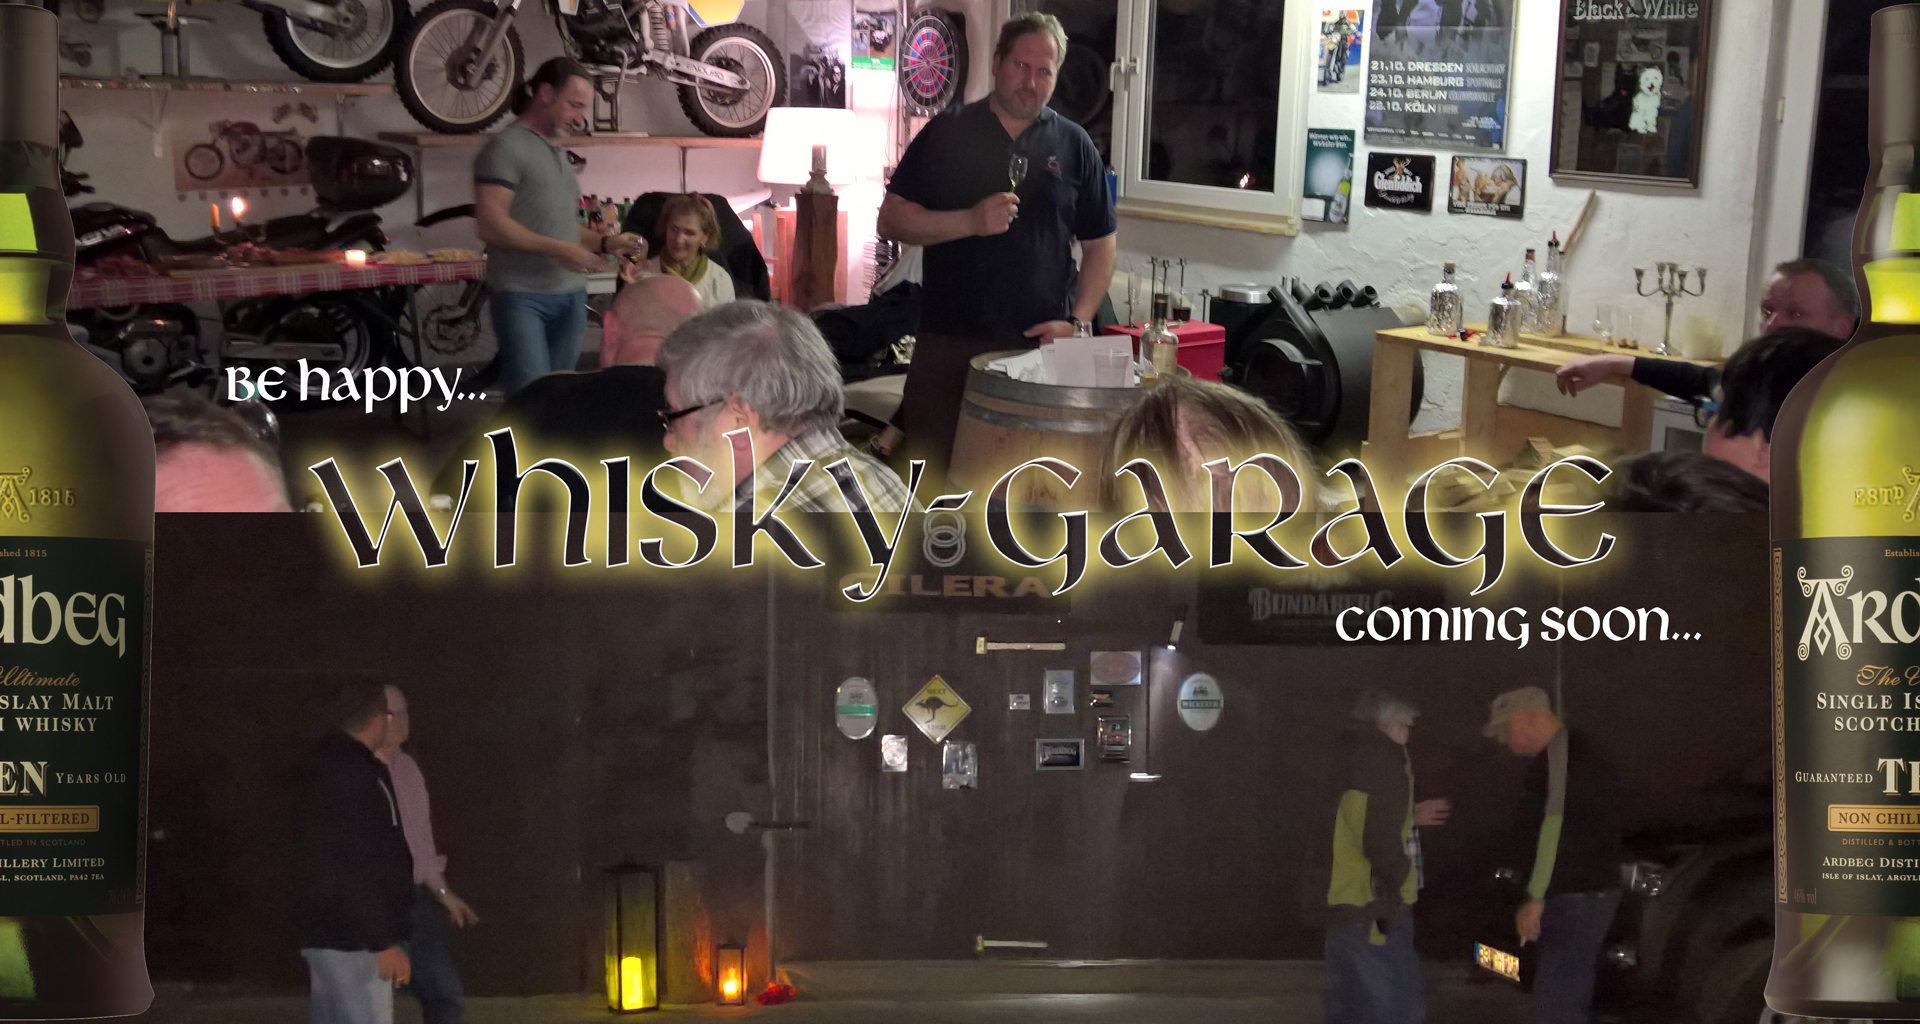 Be happy... Whisky-Garage... coming soon...